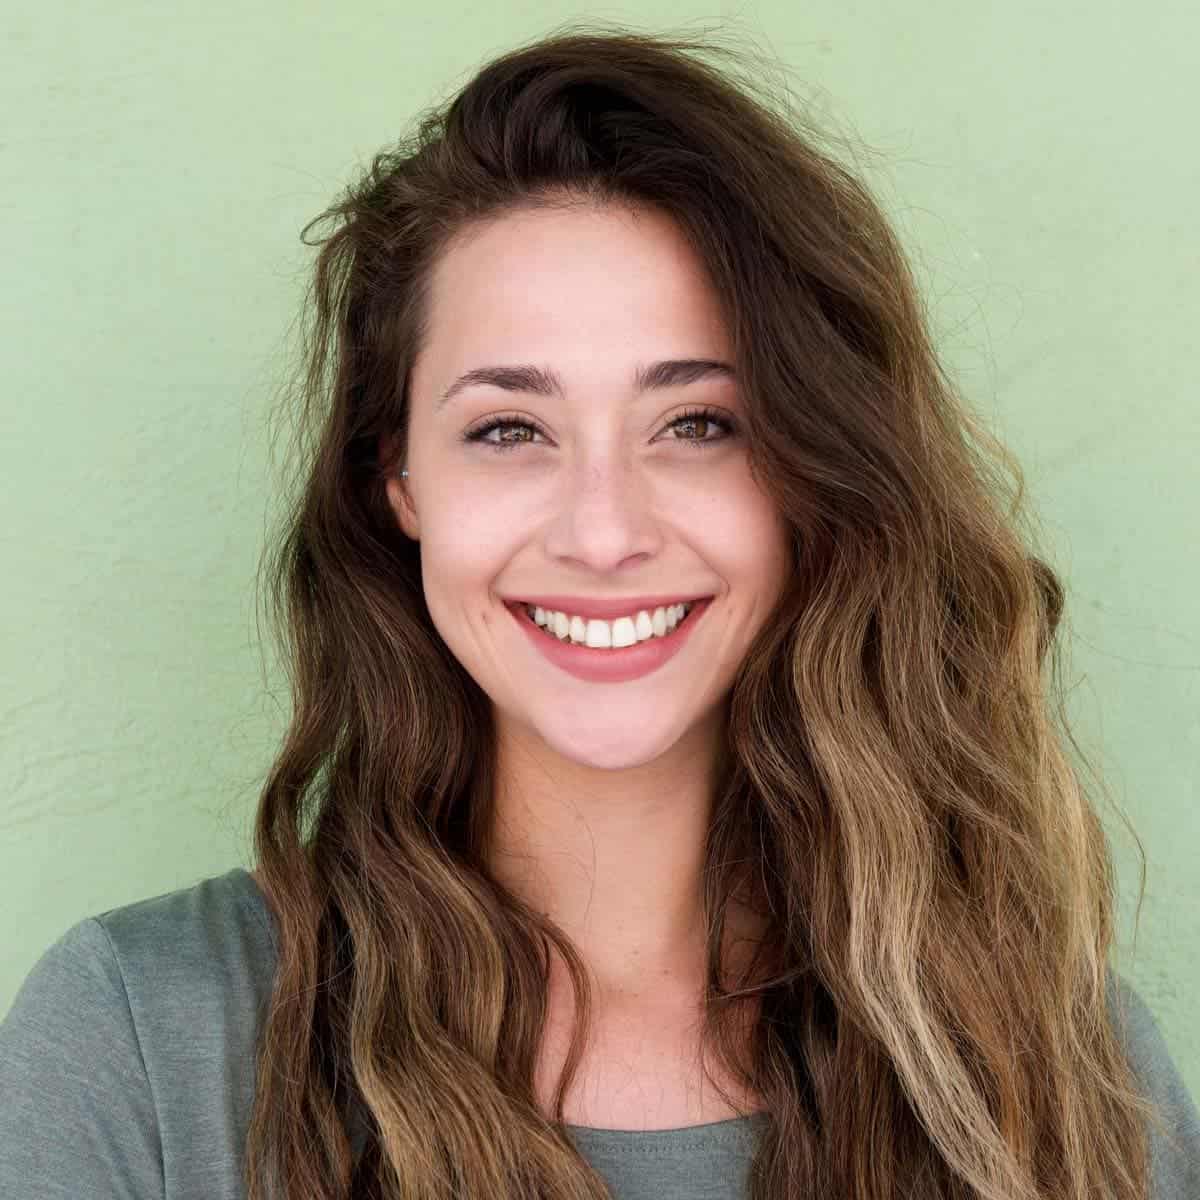 Portrait of a young woman smiling with a green background